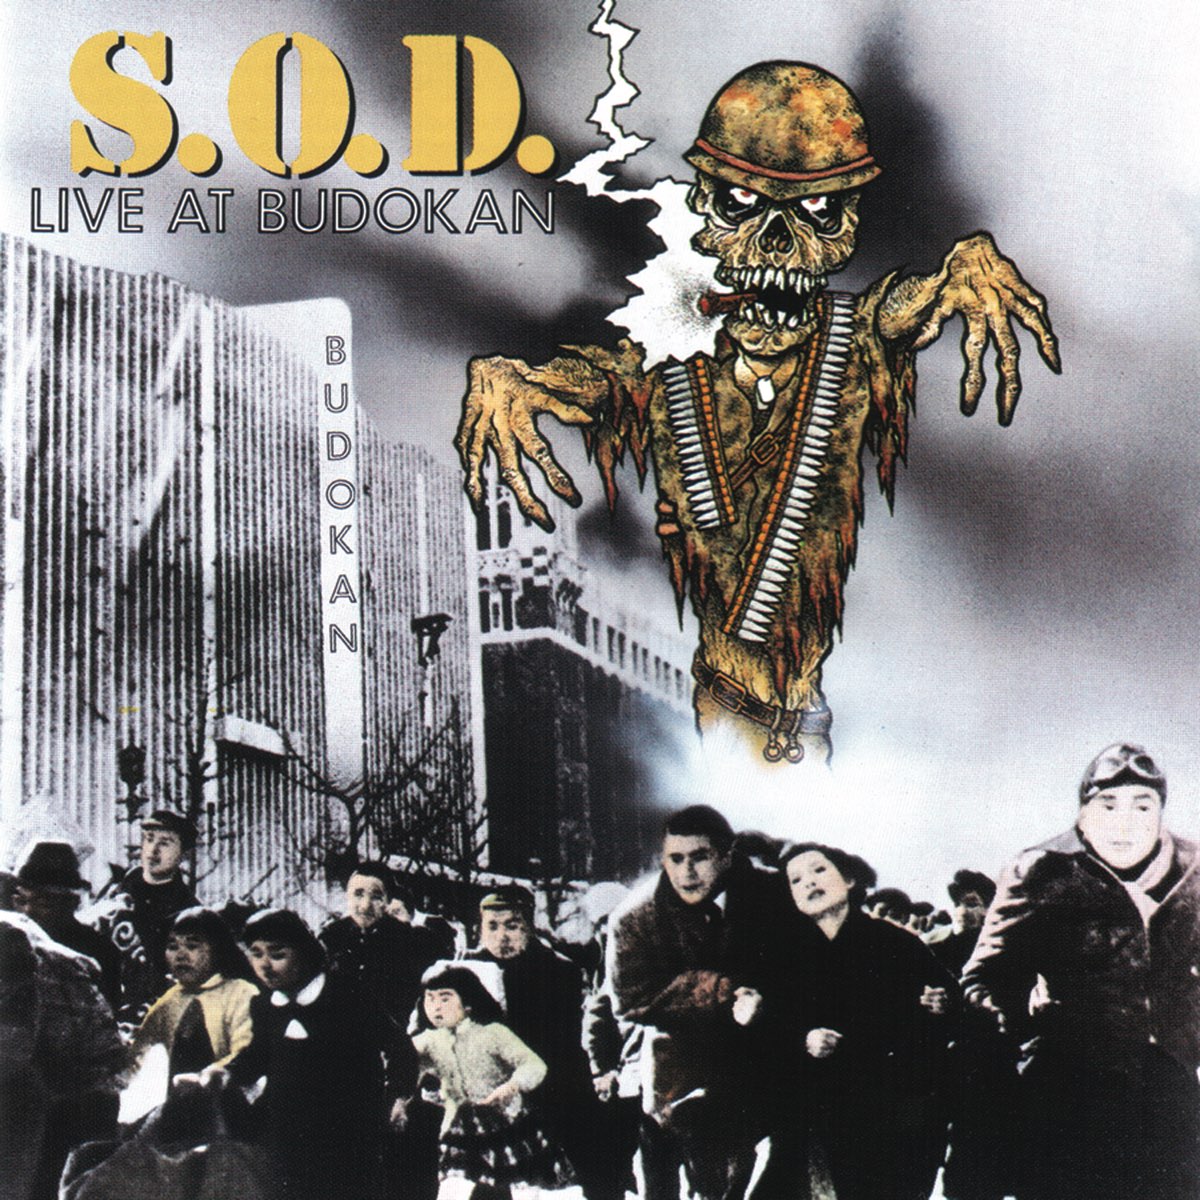 S o s live. Stormtroopers of Death Live at Budokan. Группа s.o.d.. S.O.D. Stormtroopers of Death. S.A.D.O. обложки альбомов.